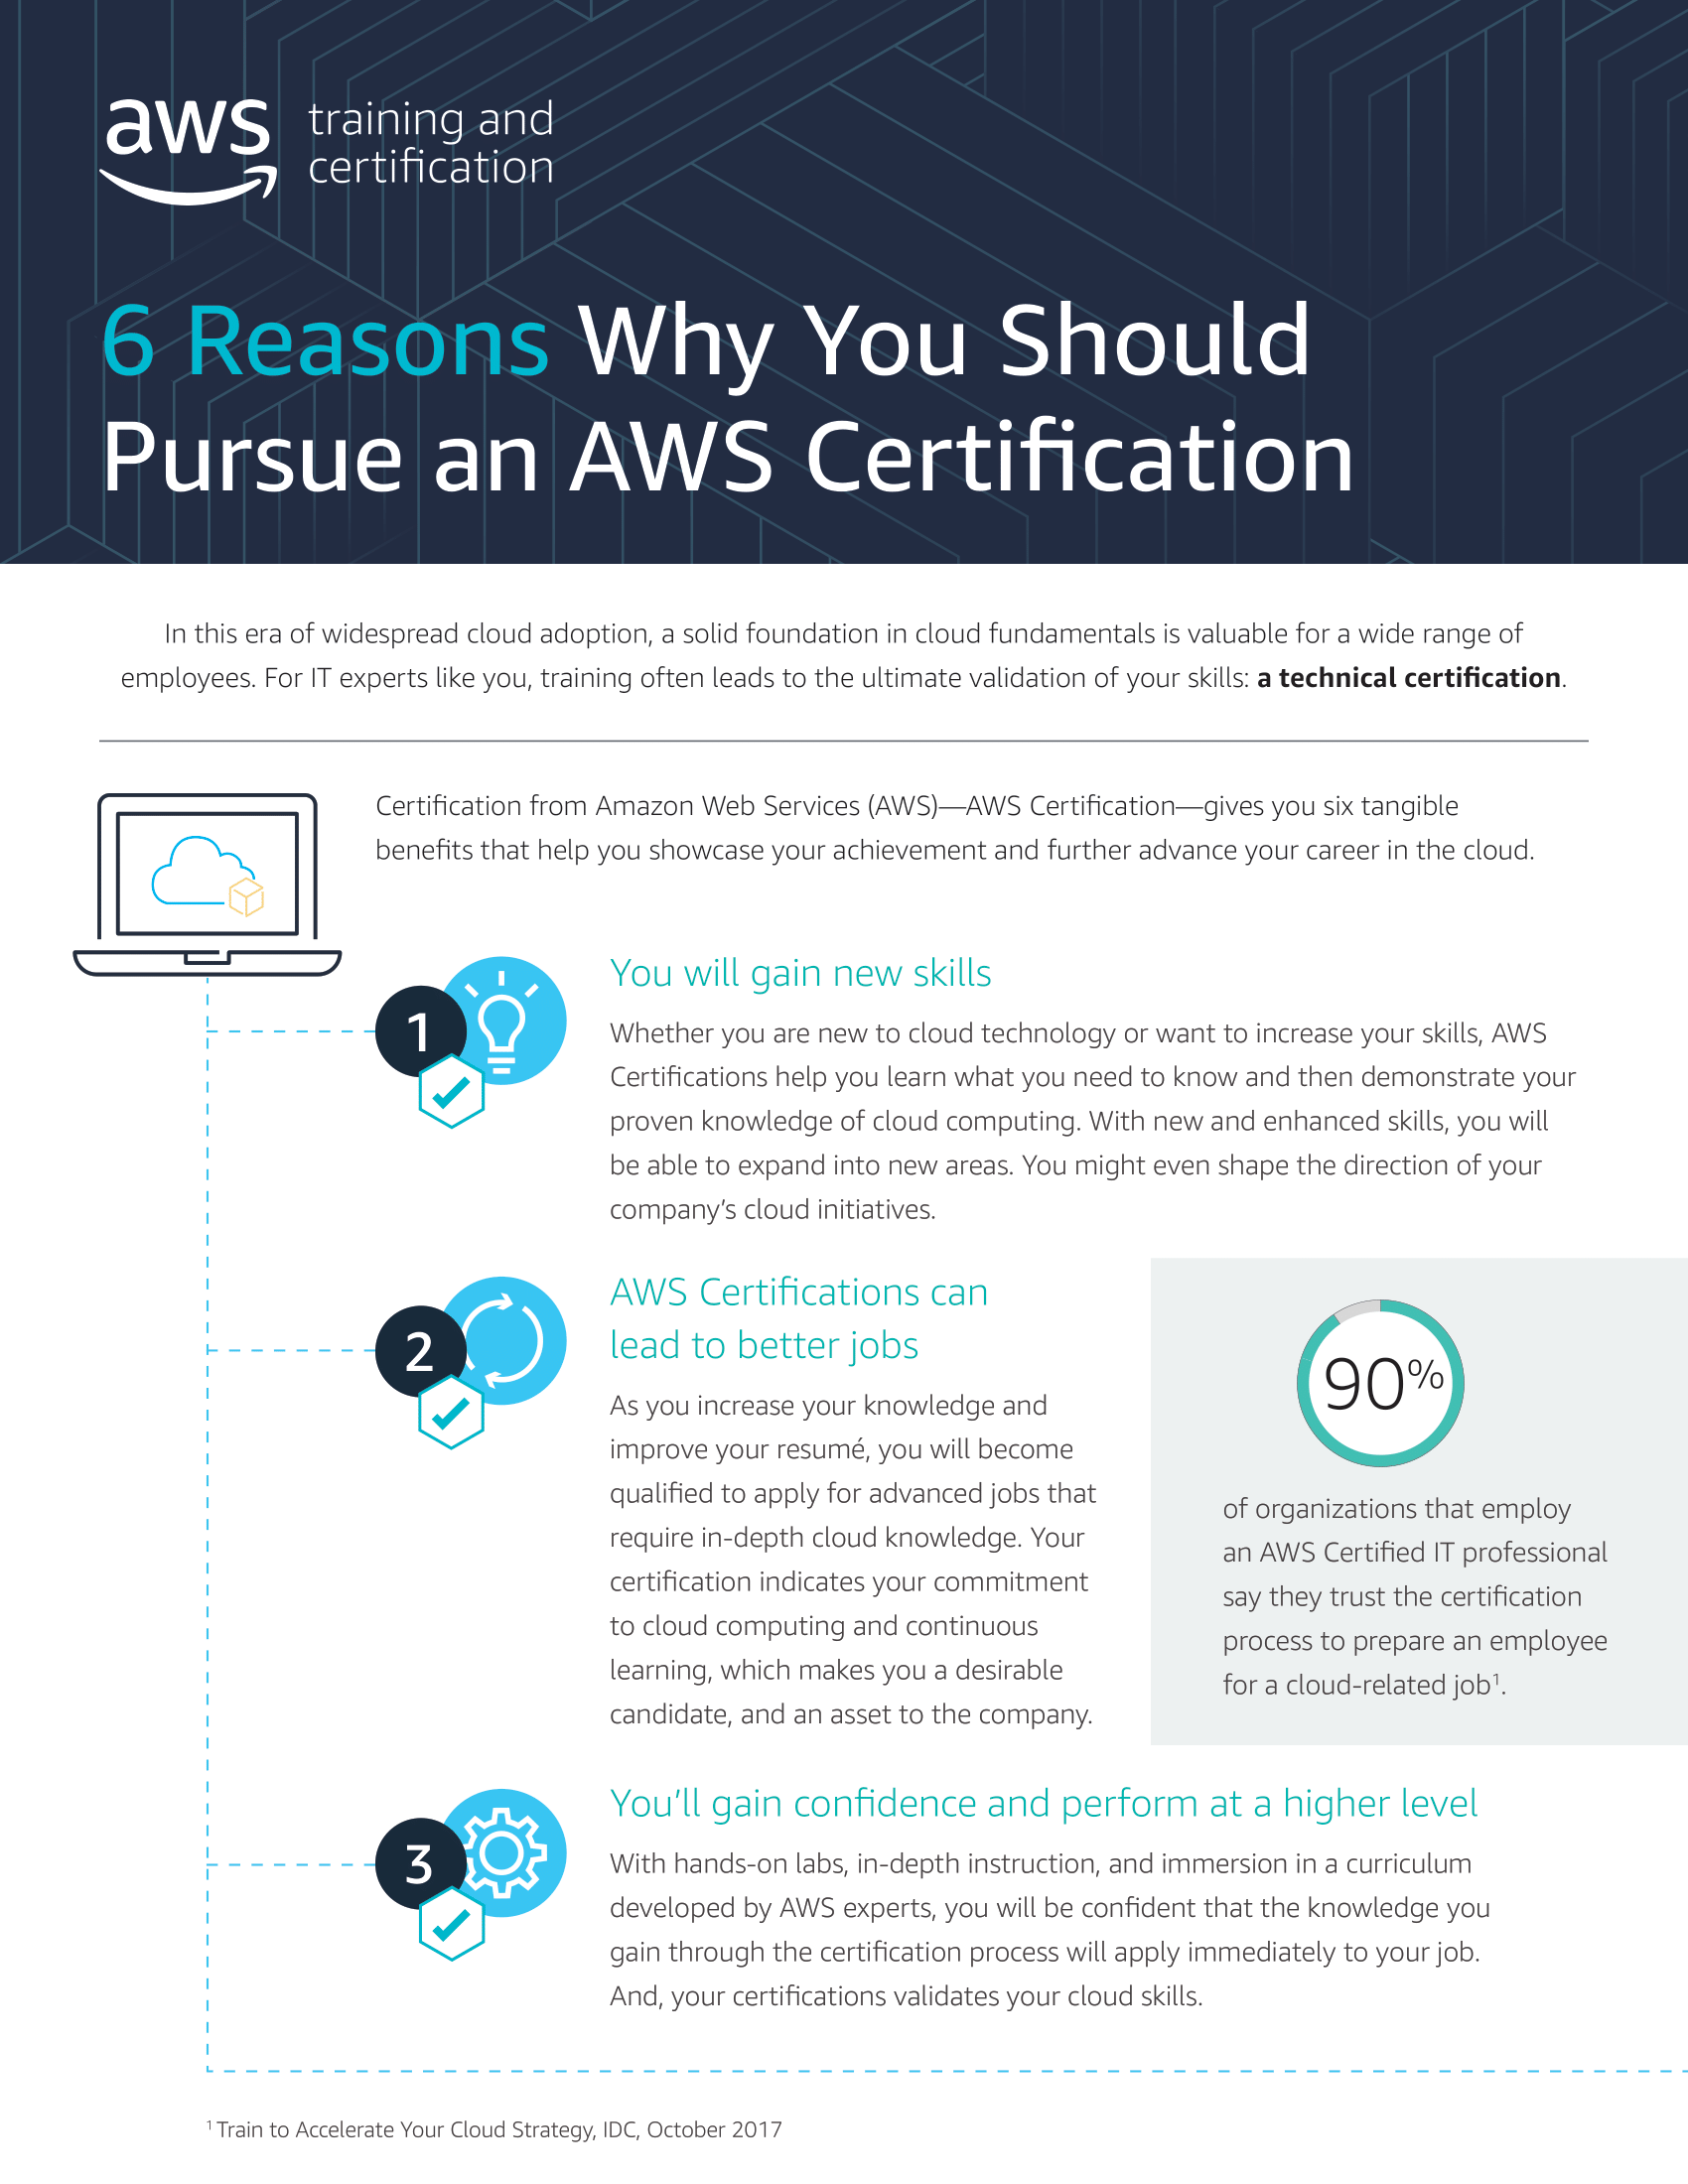 6 Reasons Why You Should Pursue an AWS Certification